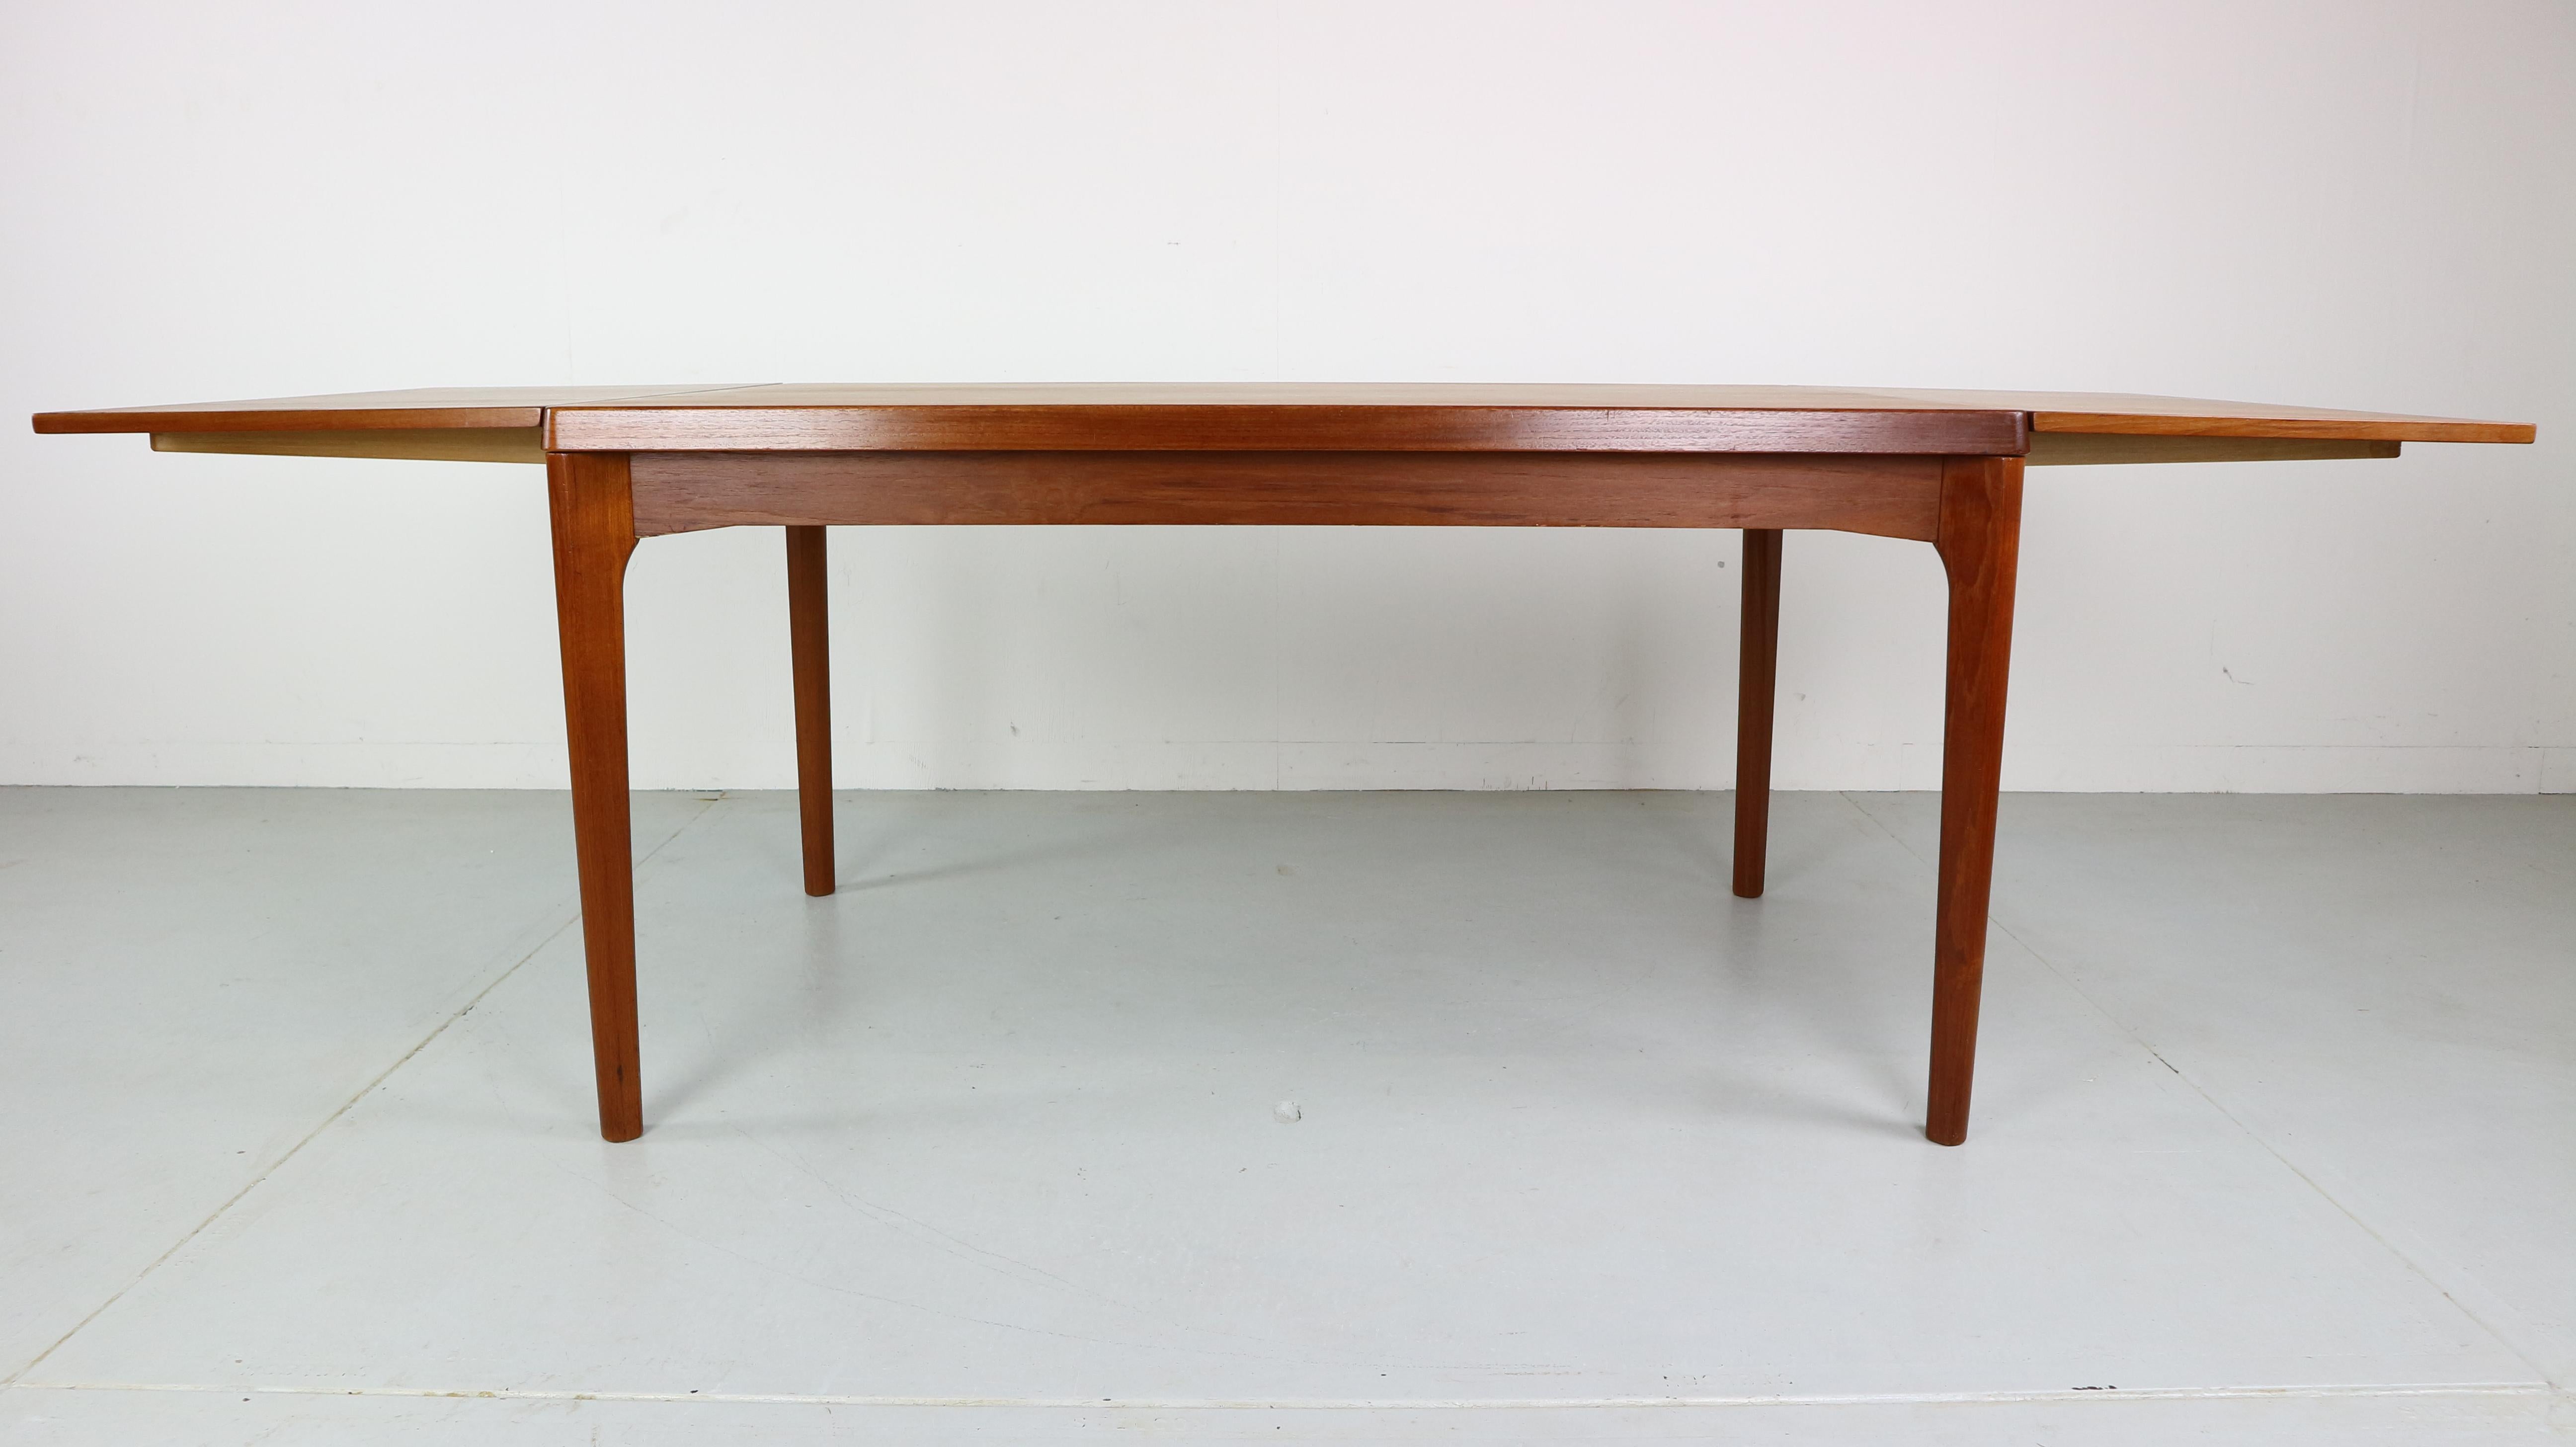 This Mid-Century Modern Danish design dining table was designed by Henning Kjaernulf for Vejle Stole Møbelfabrik during the 1960s. The table features two extension pieces, increasing the seating capacity and the total length from 140 to 190 to 240